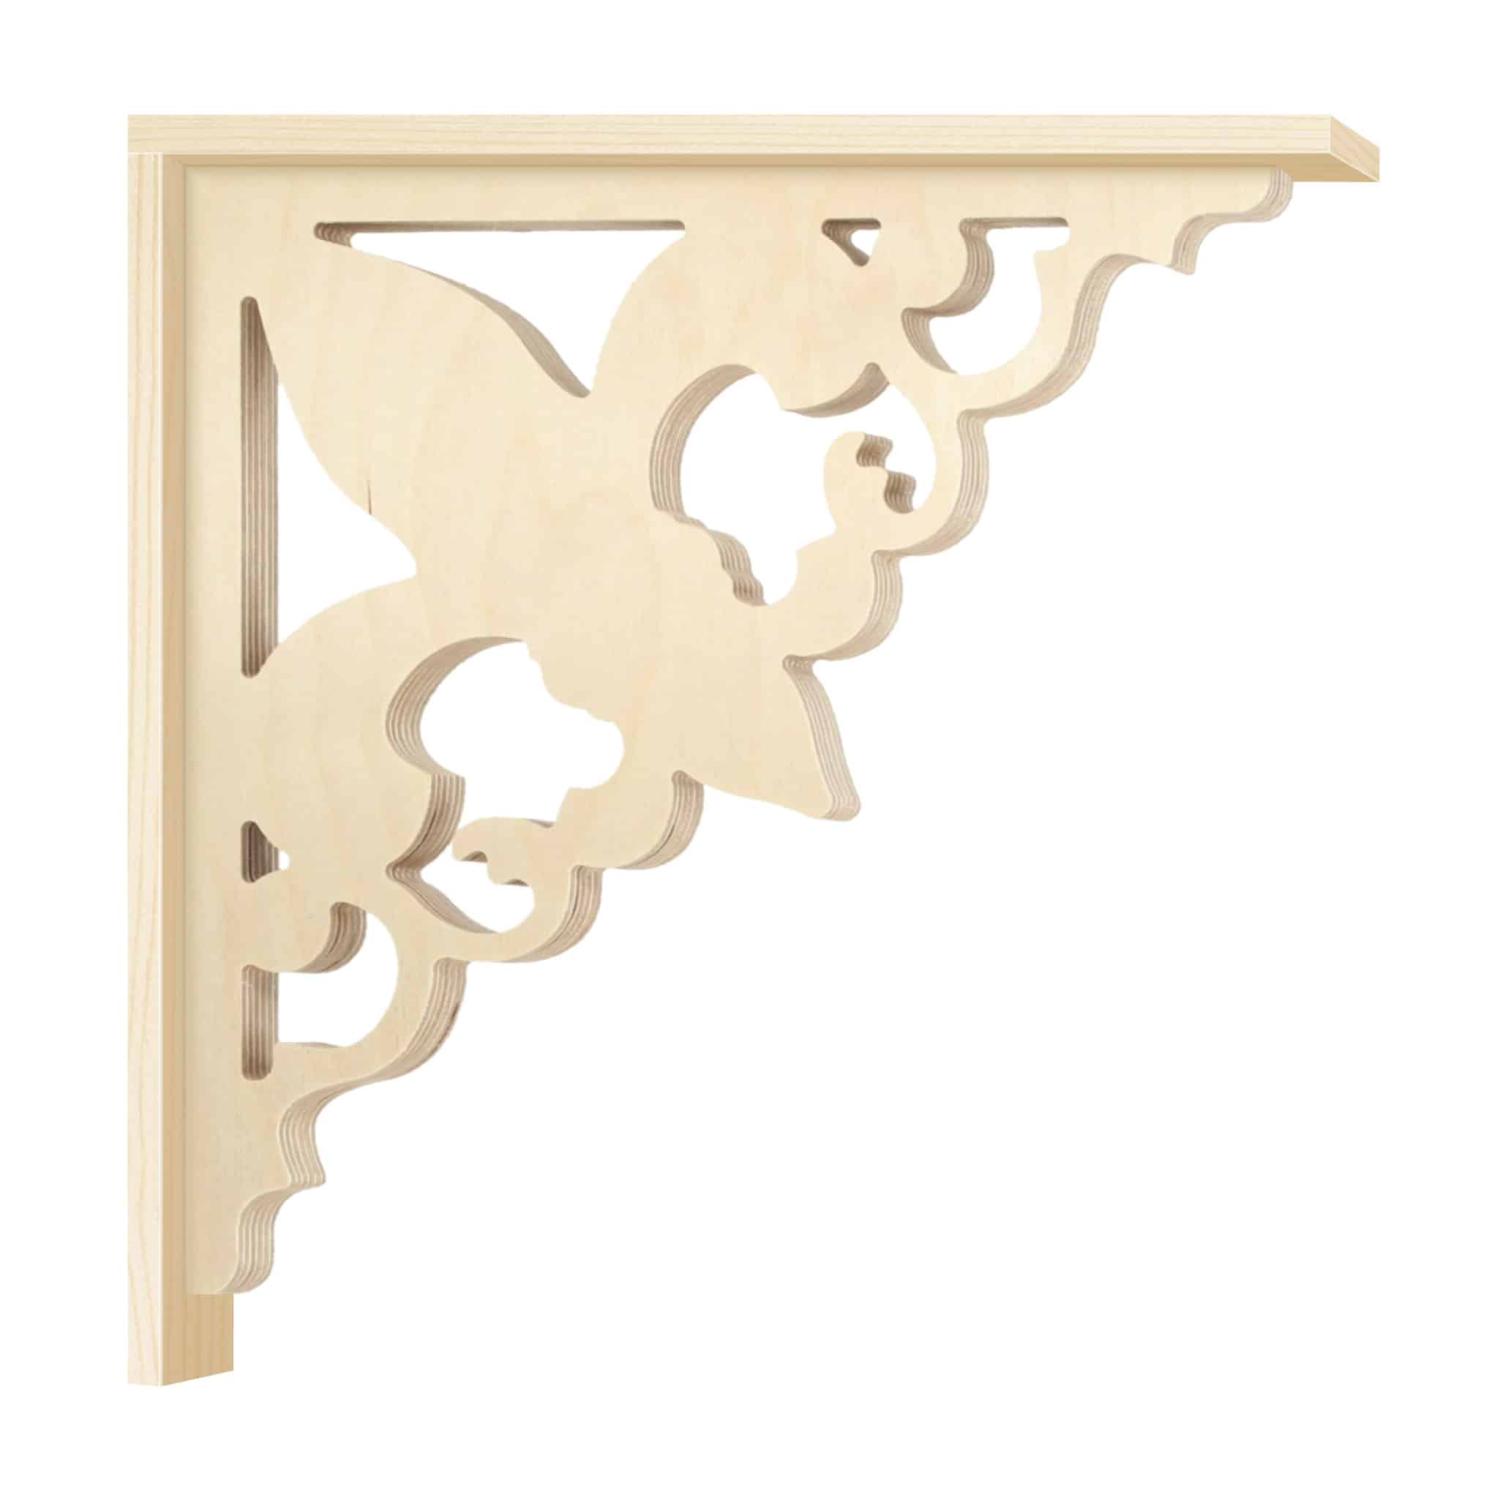 Bracket 095 – Victorian gingerbread scroll corbel for porch and veranda with decorative wooden strip